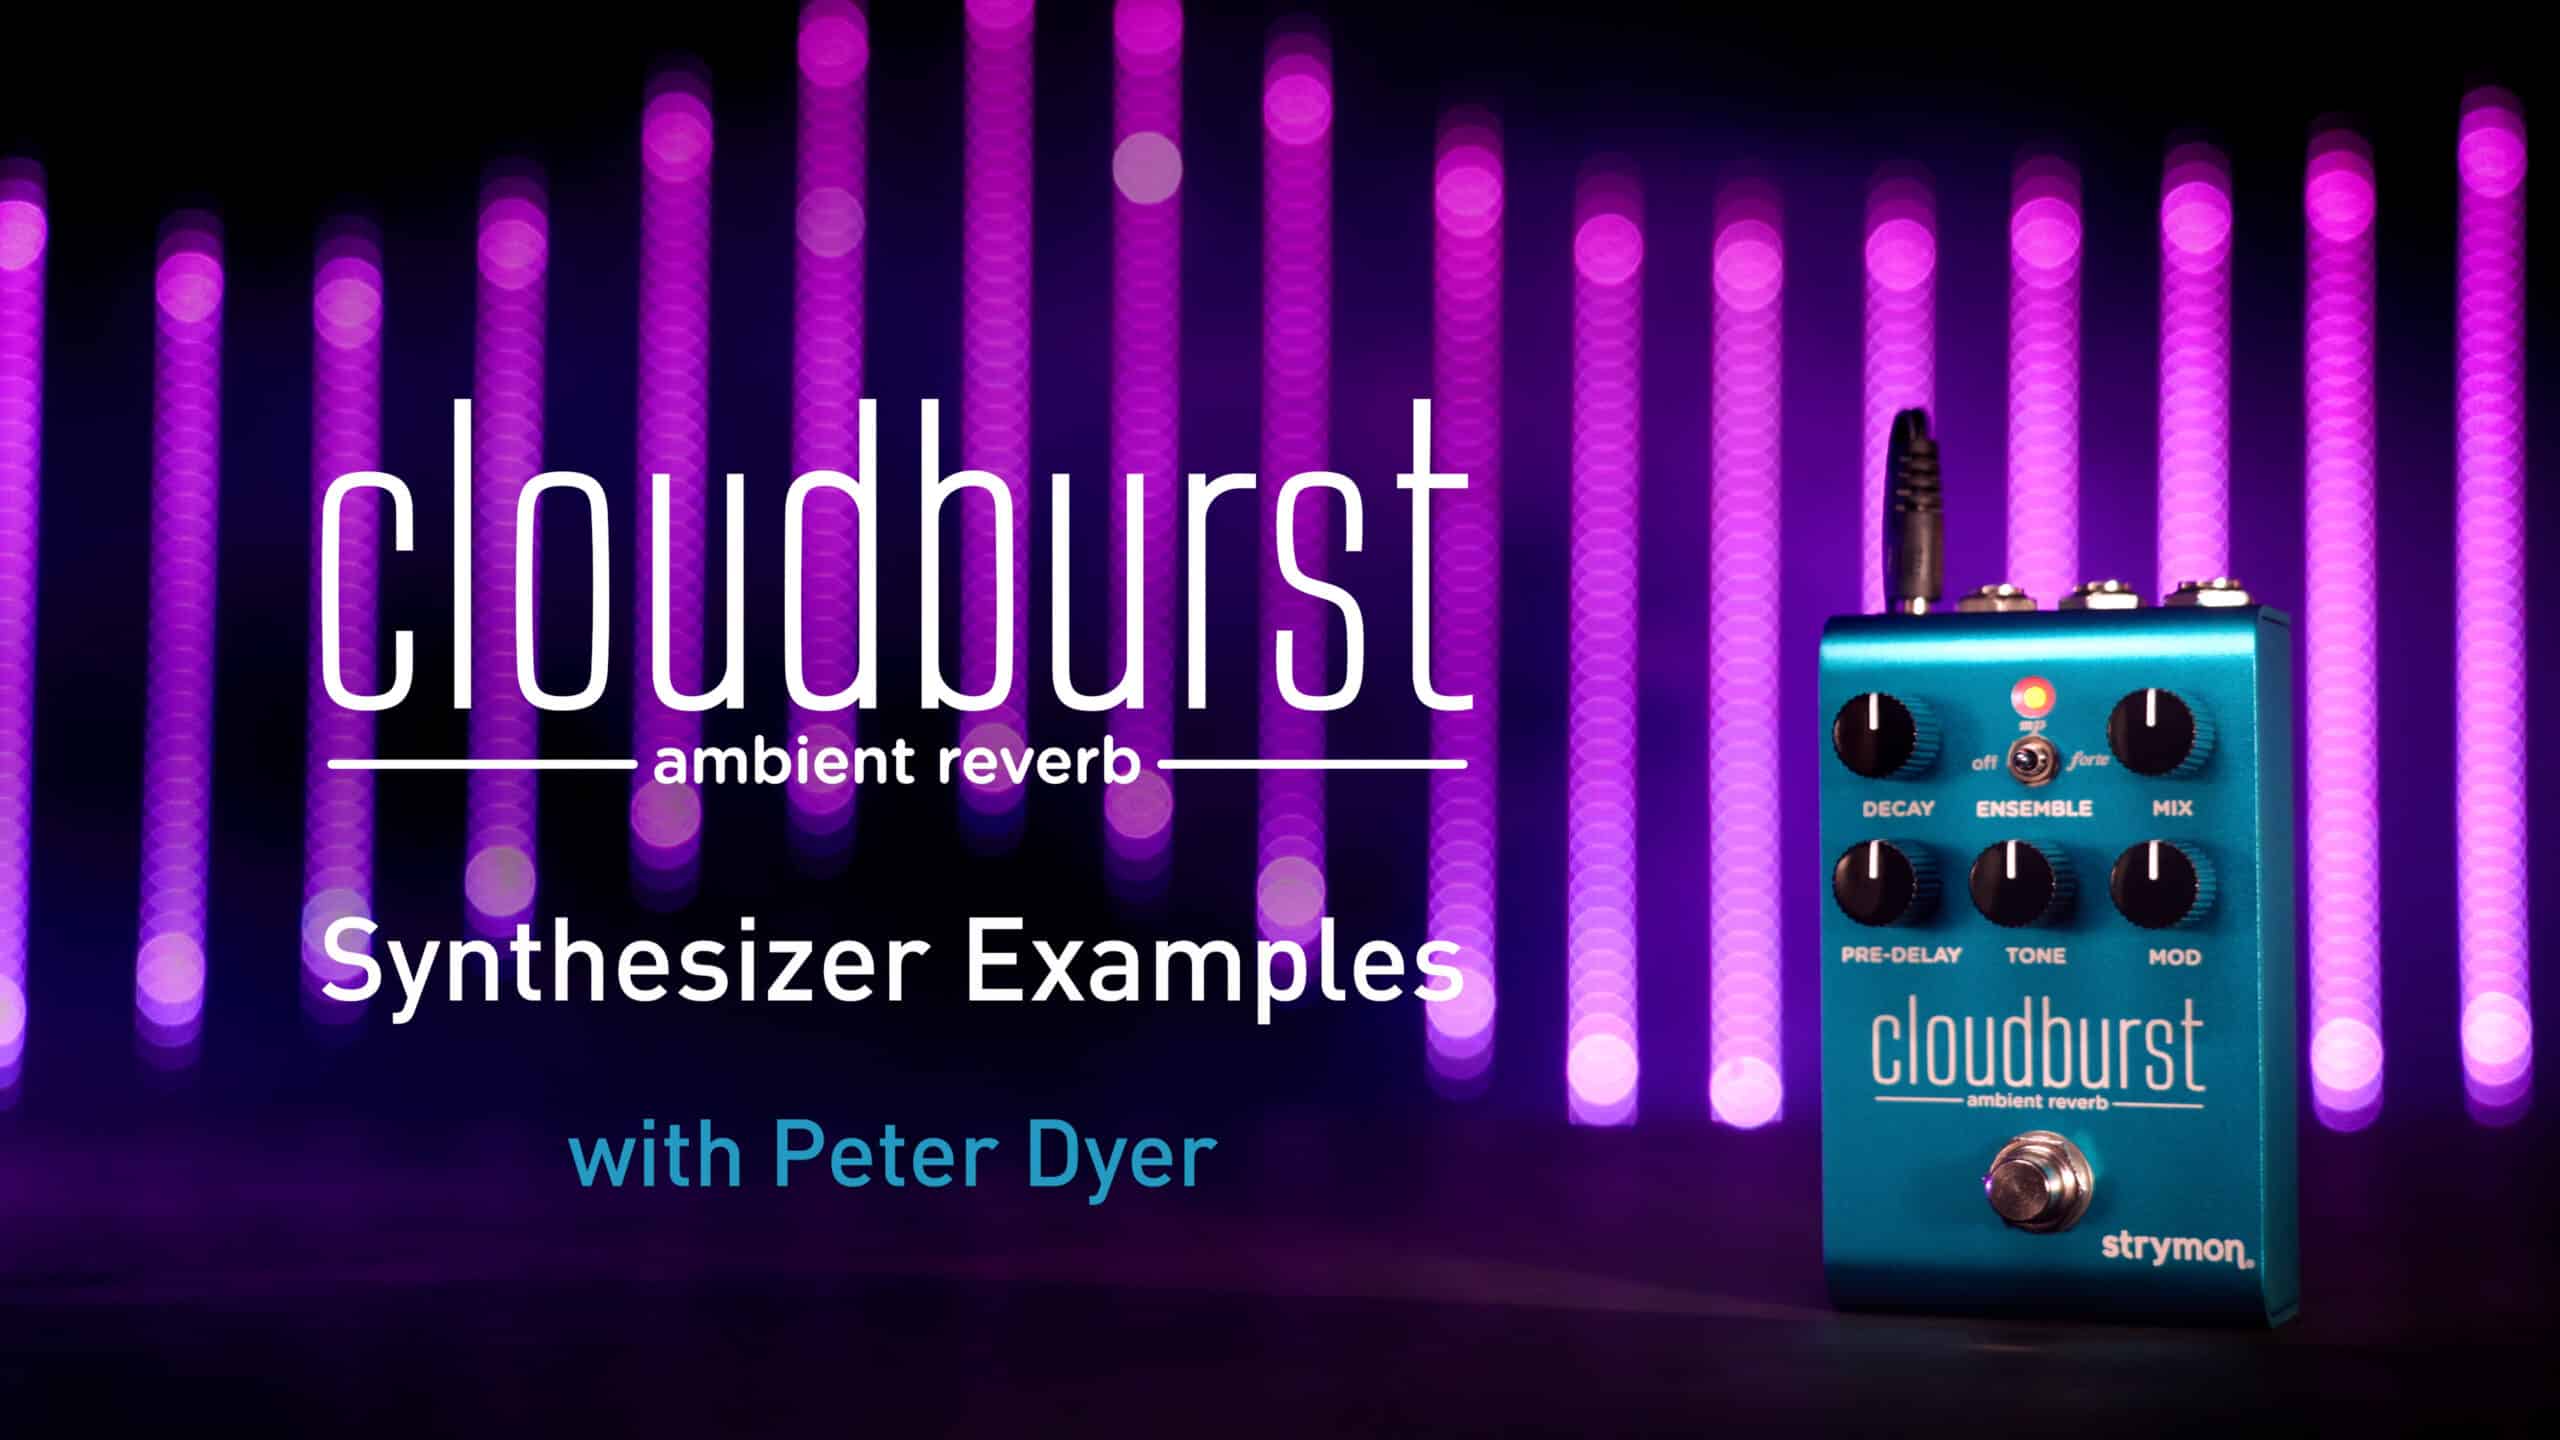 Cloudburst ambient reverb synthesizer examples with Peter Dyer